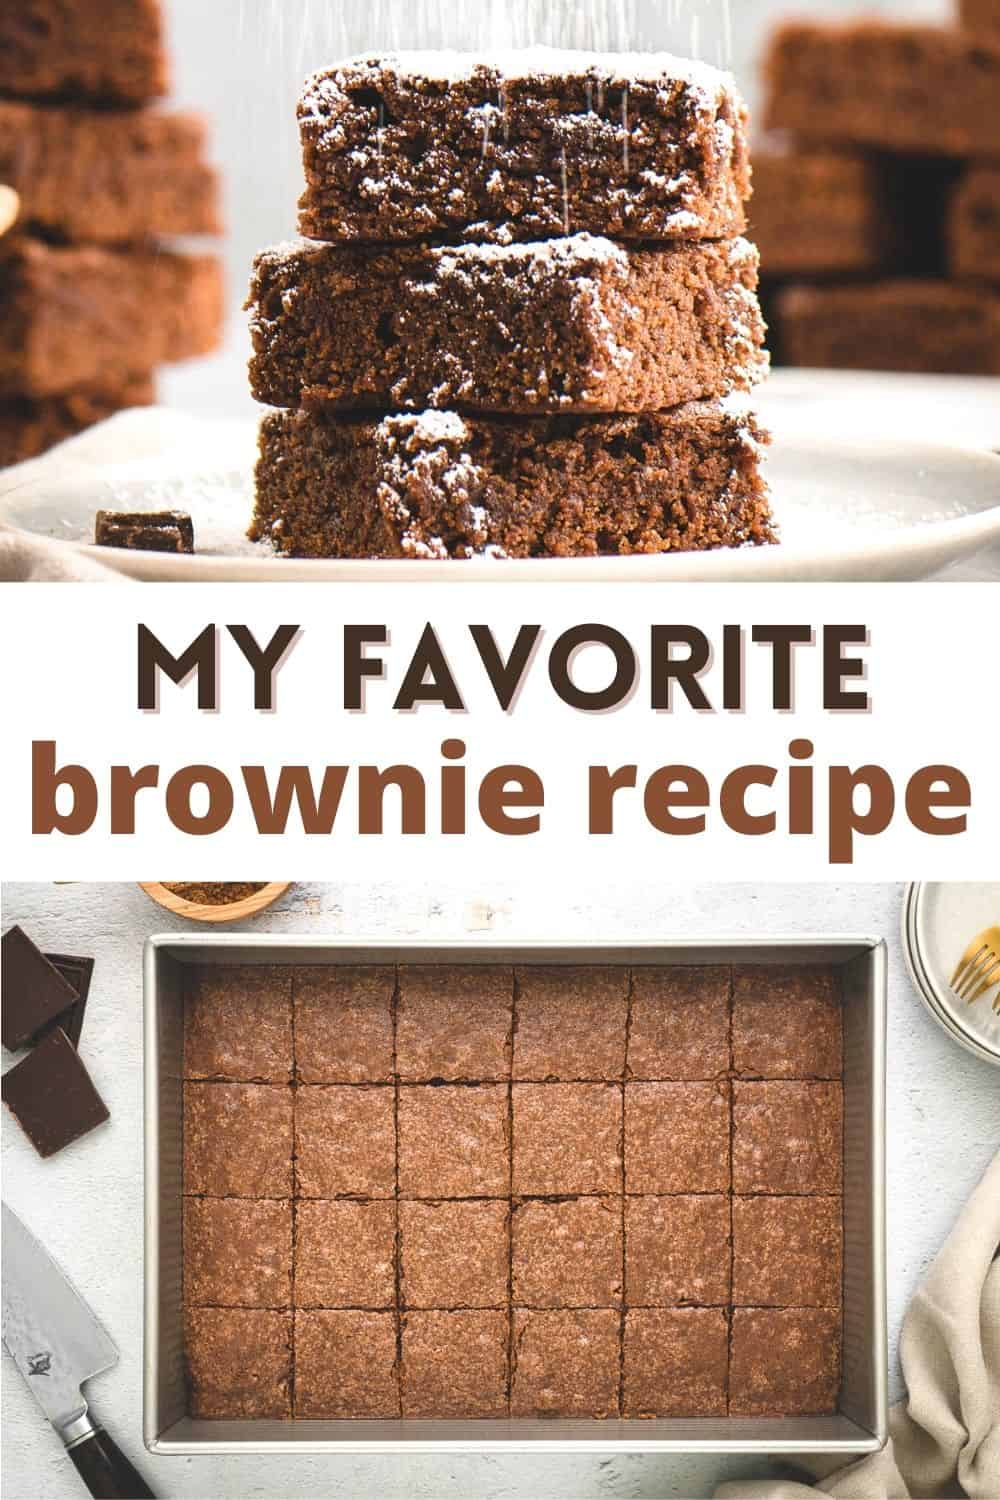 This is the perfect brownie recipe and tastes better from scratch. Use just one mixing bowl and a wooden spoon. You will love these delicious, moist, fudgy brownies!